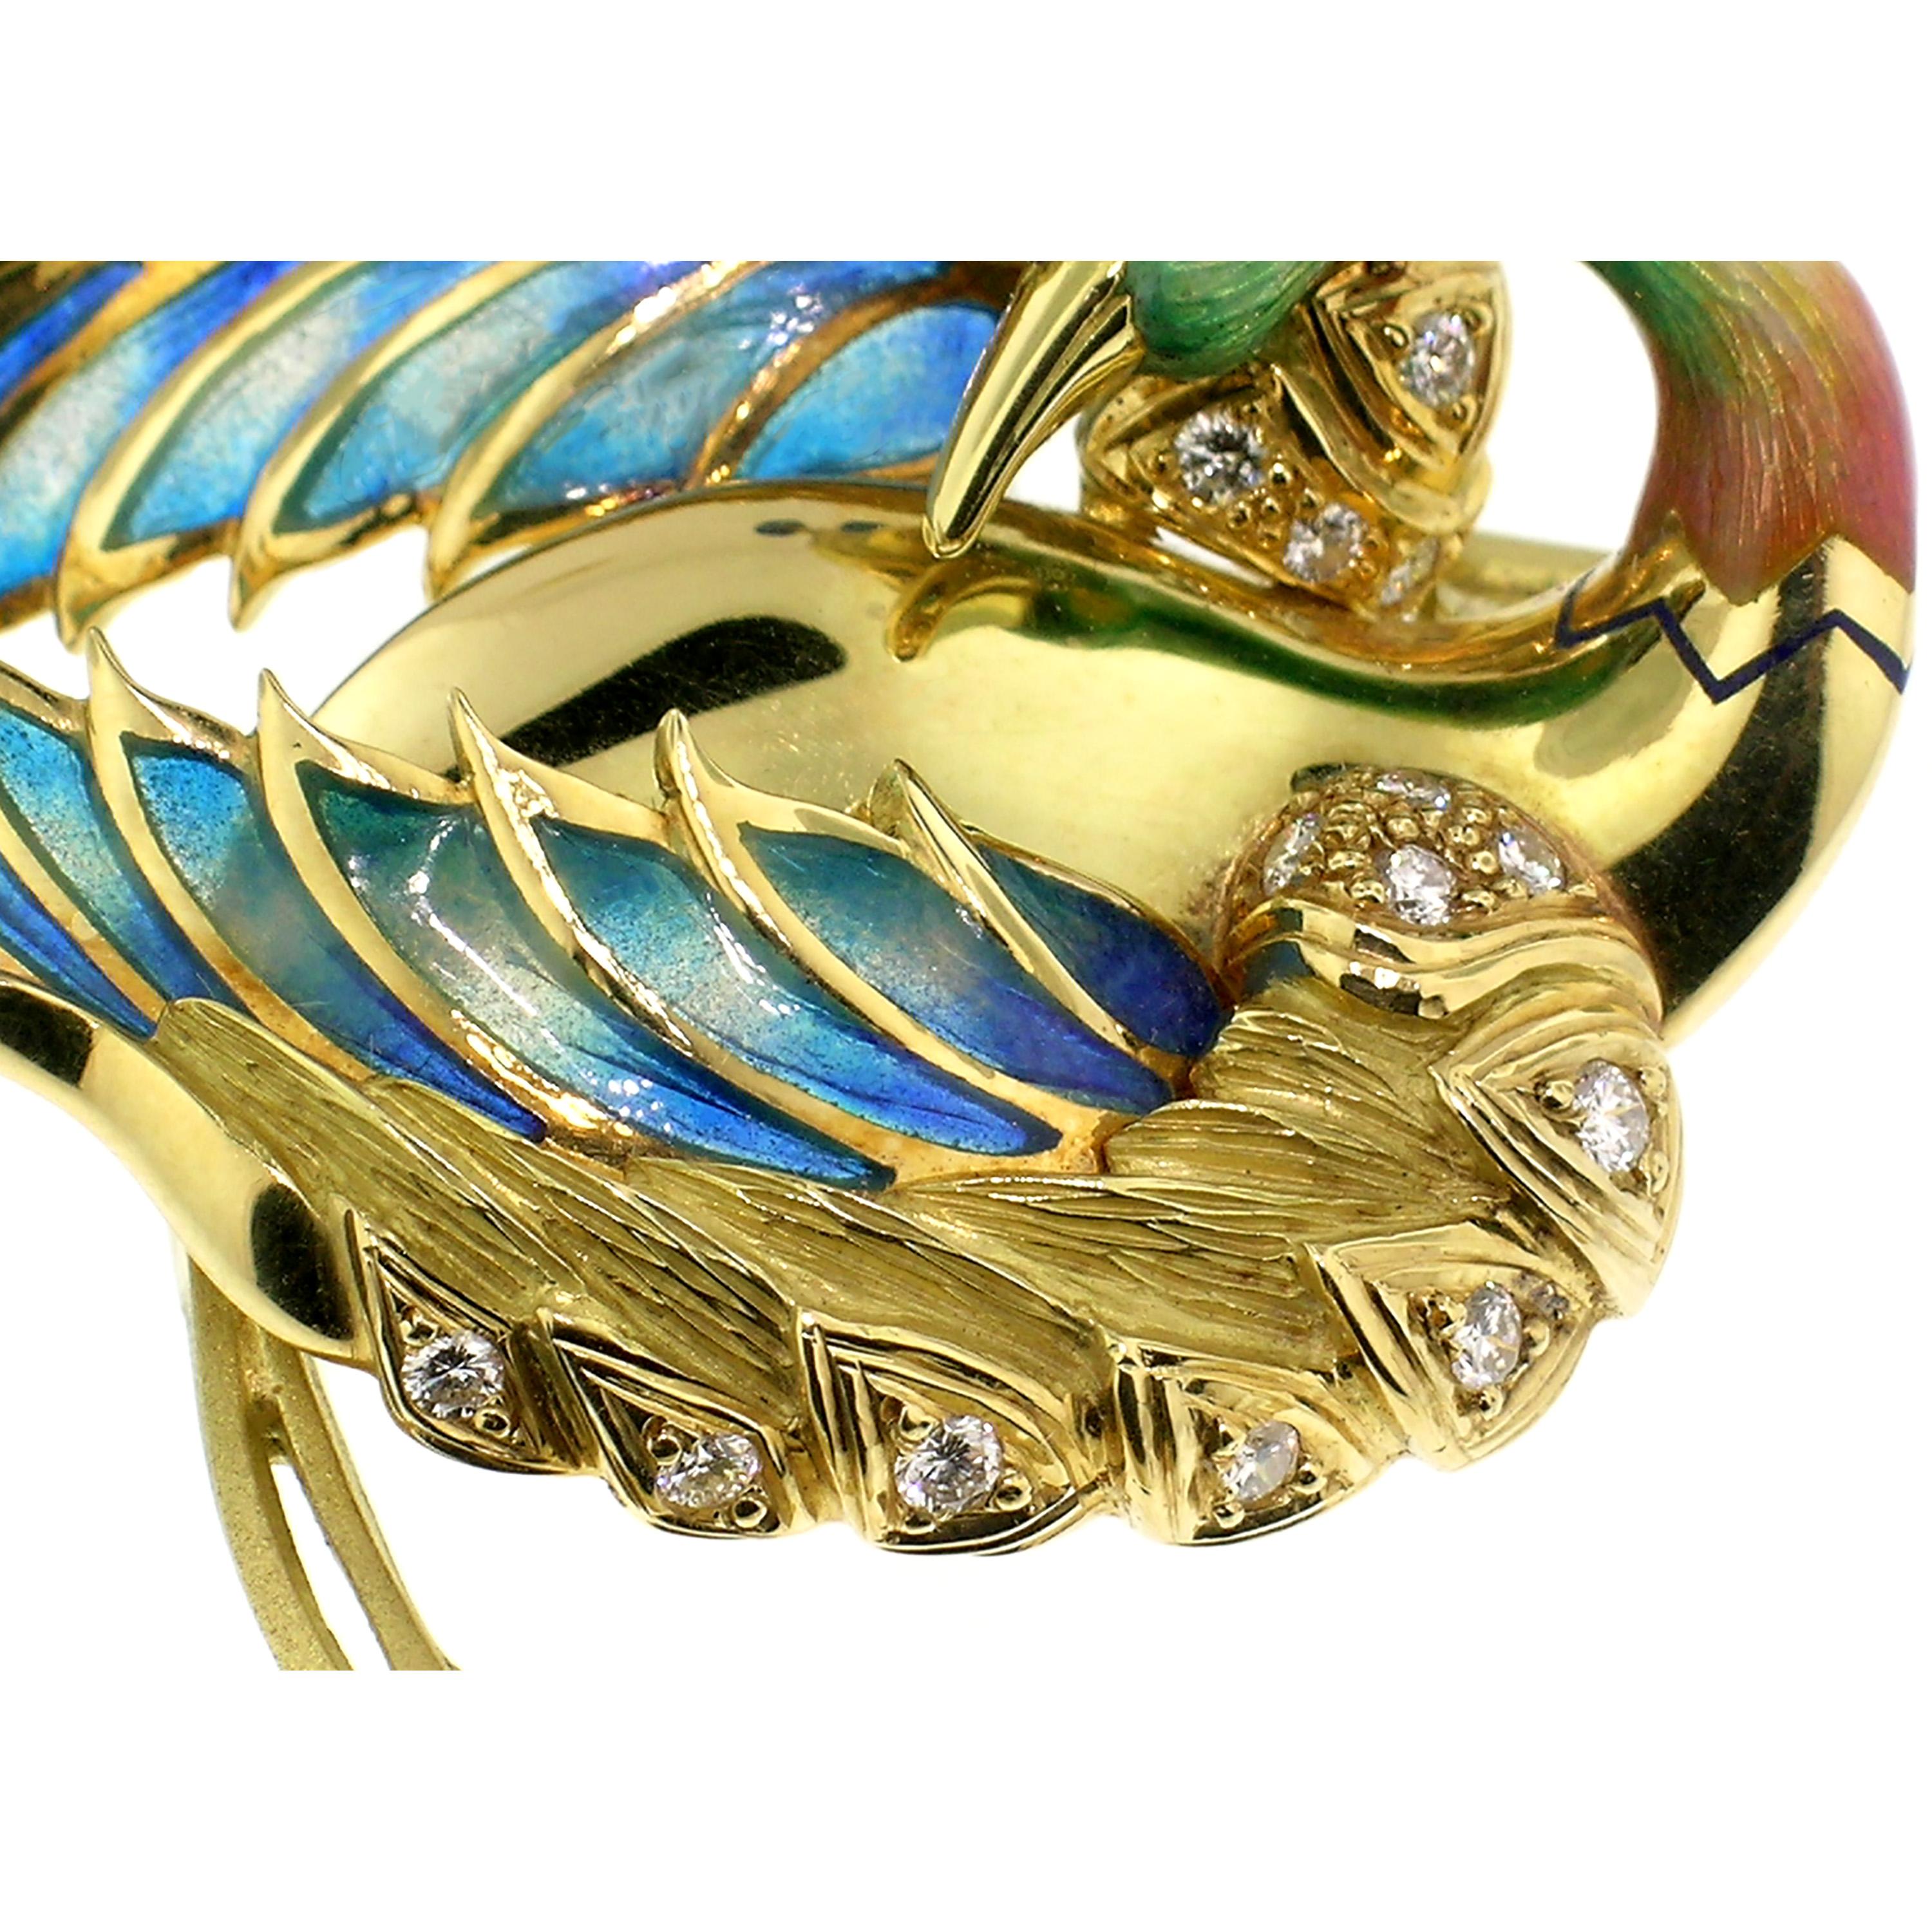 Contemporary Antoni Farré “Bird of Paradise” 18kt and Plique a Jour Brooch, Handmade in Spain